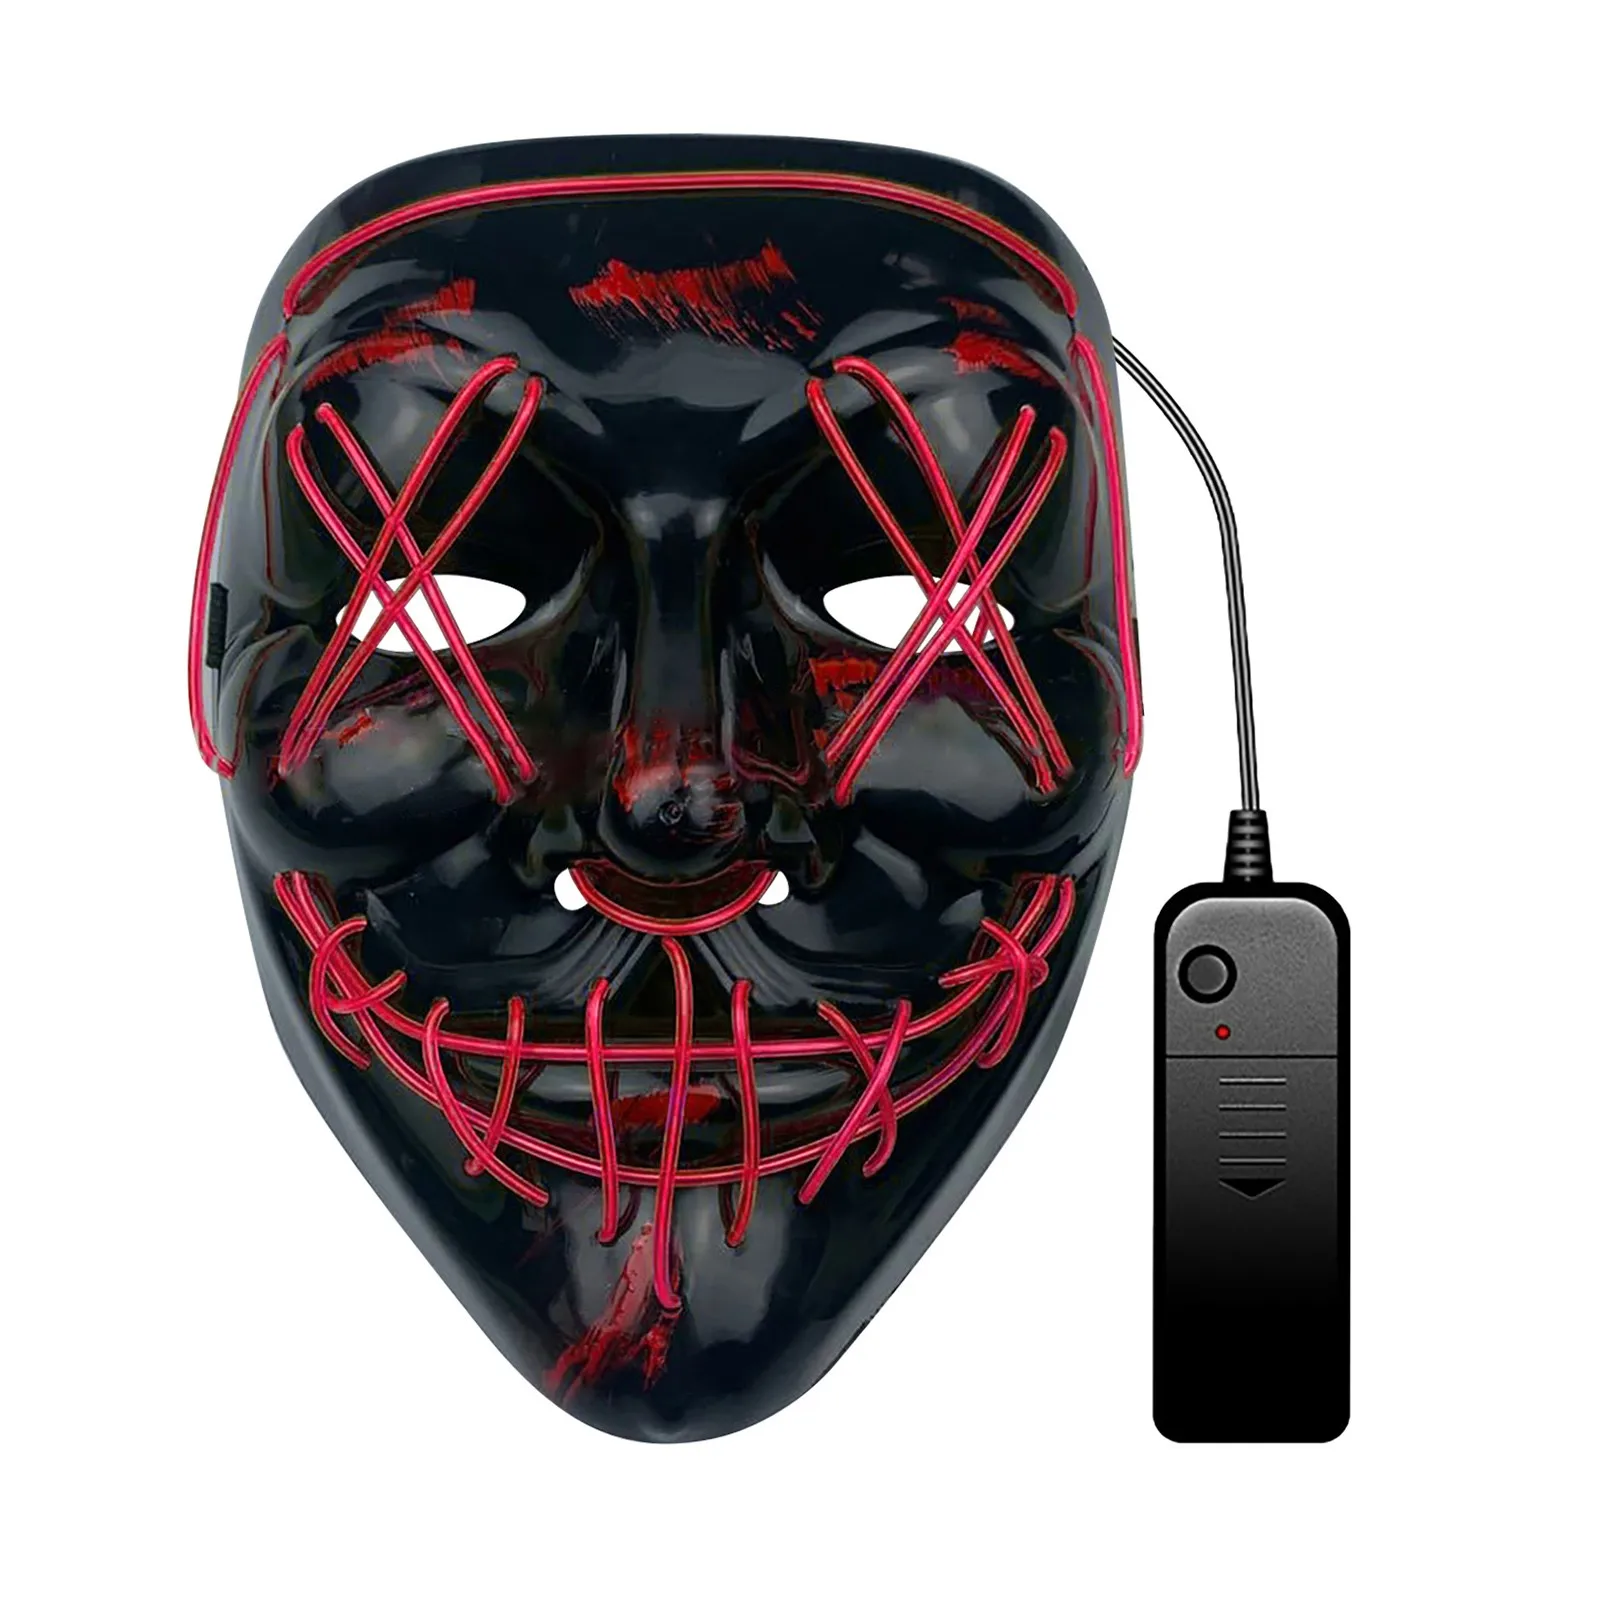 

Cosmask Halloween Neon Mask Led Mask Masque Masquerade Party Masks Light Glow In The Dark Funny Masks Cosplay Costume Supplies